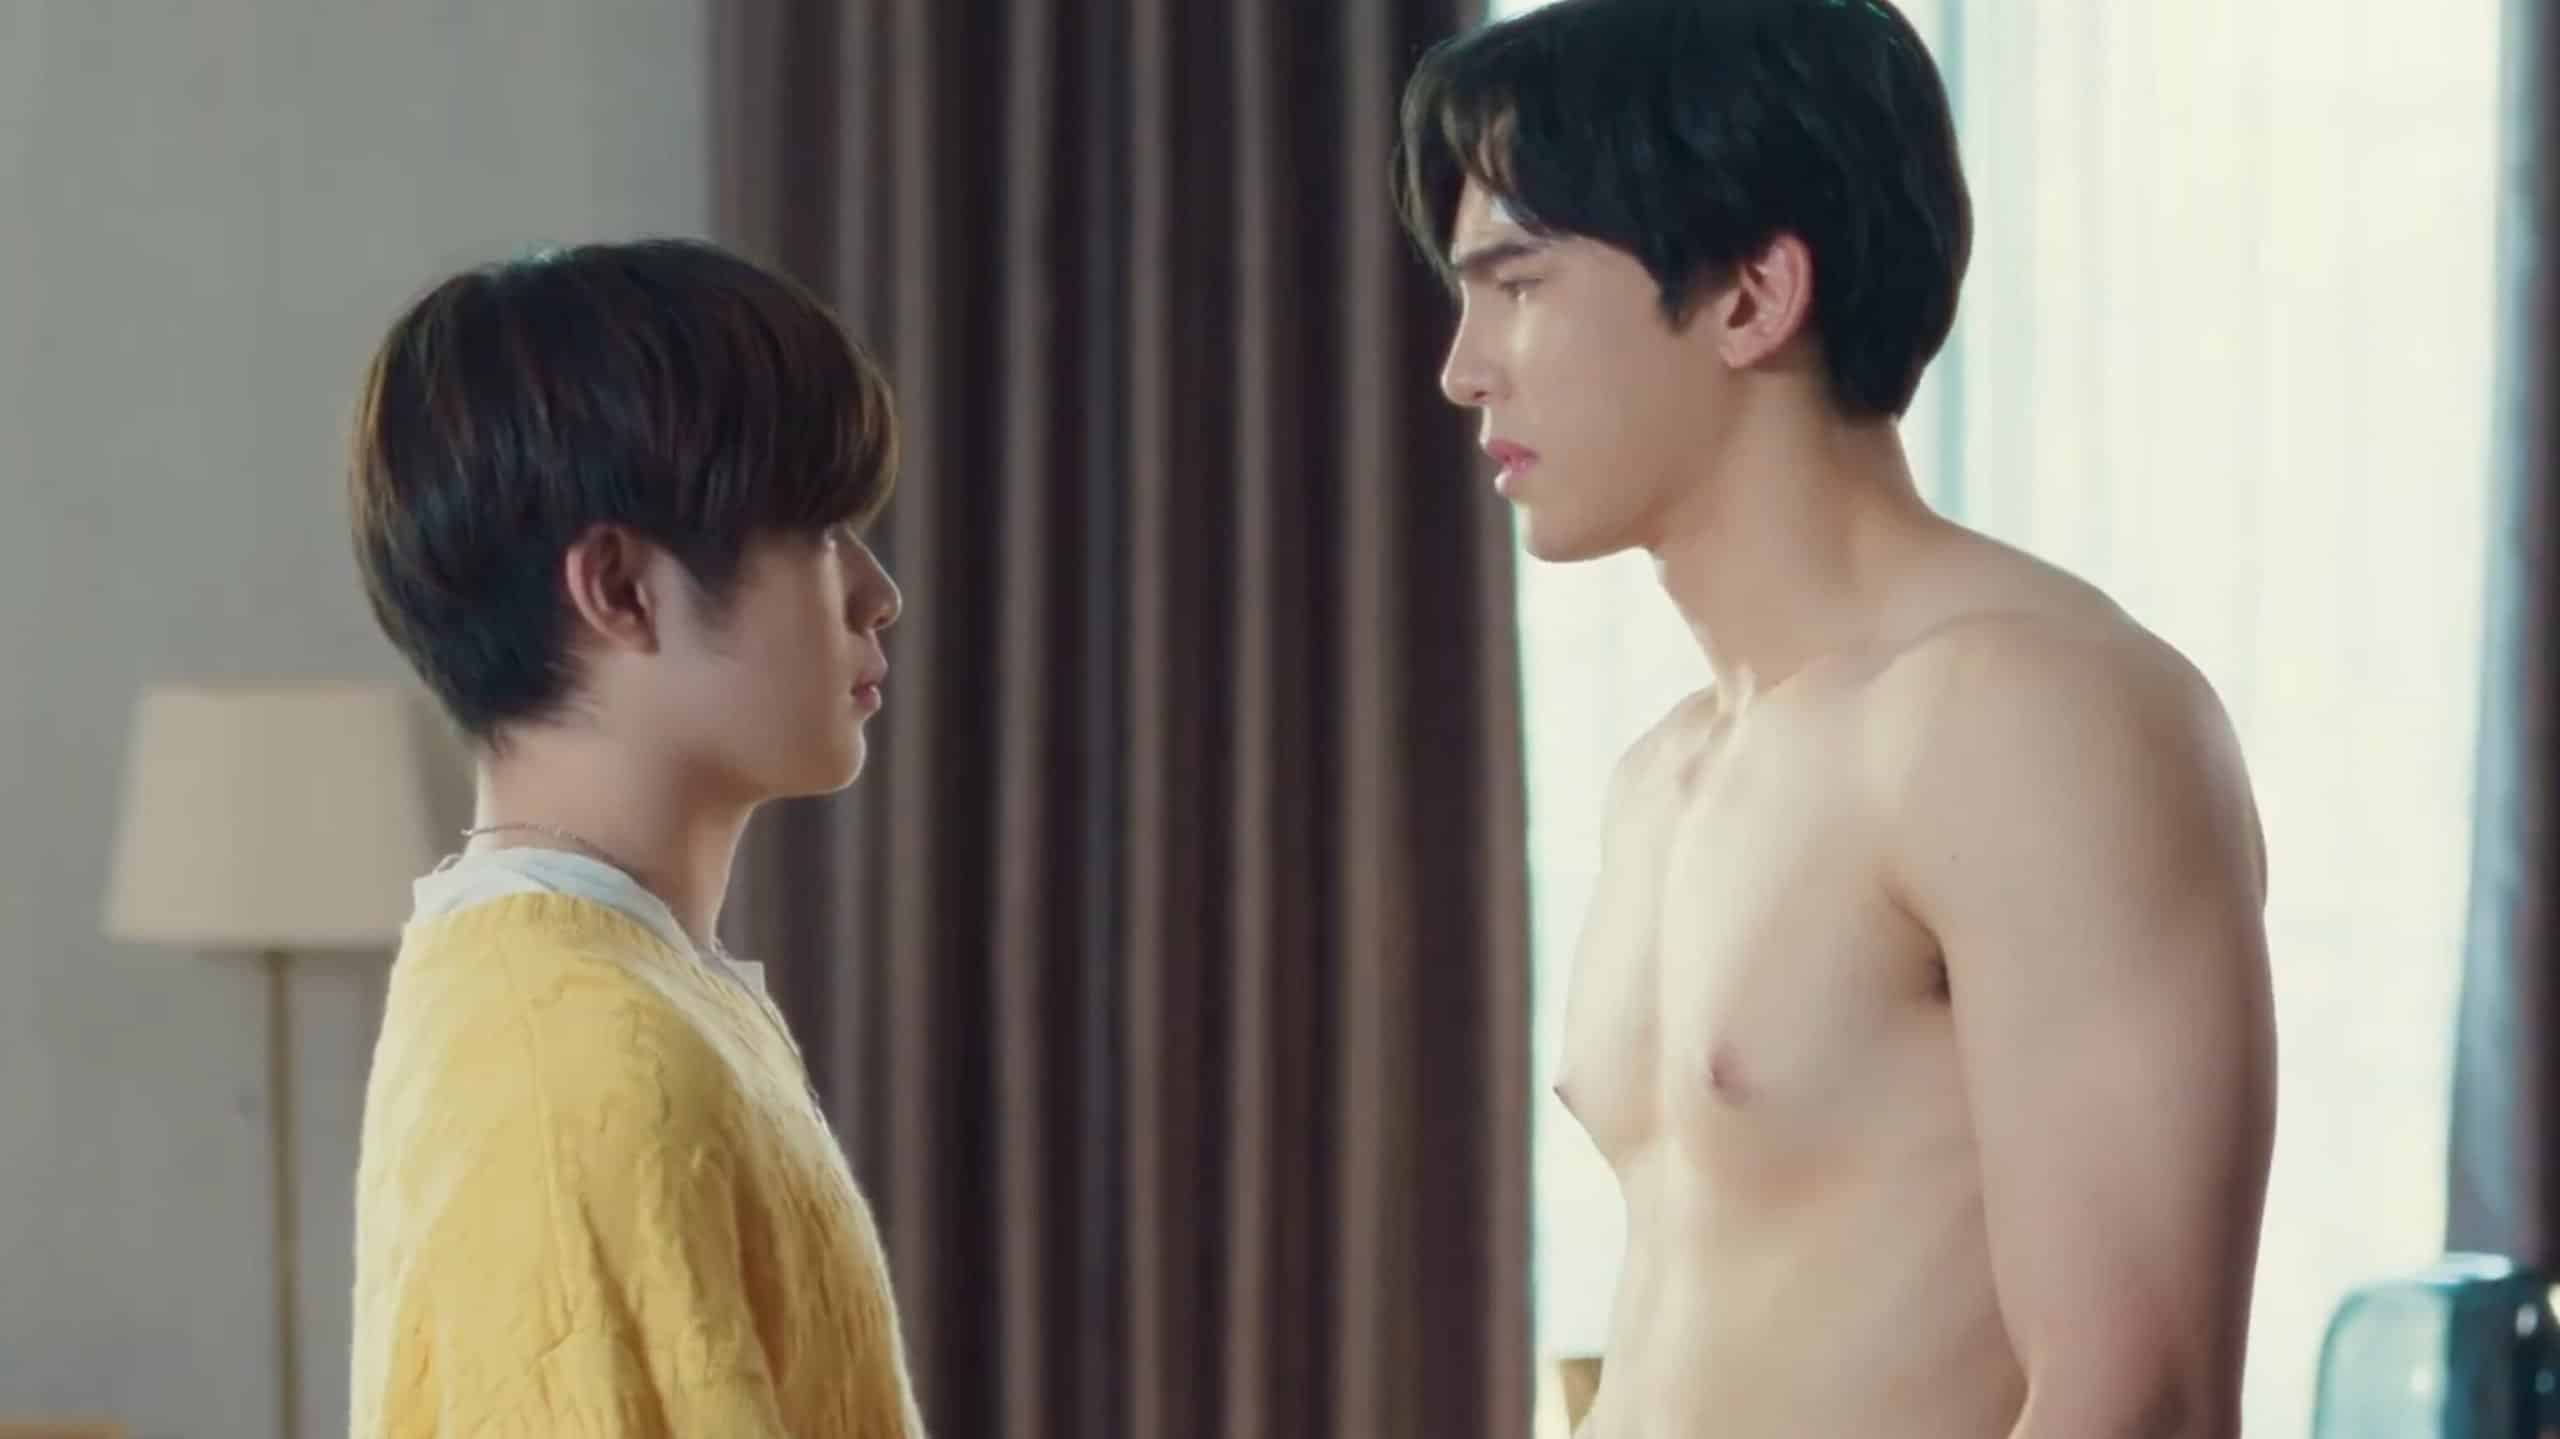 Naughty Babe Episode 8: Release Date, Preview and Streaming Guide 